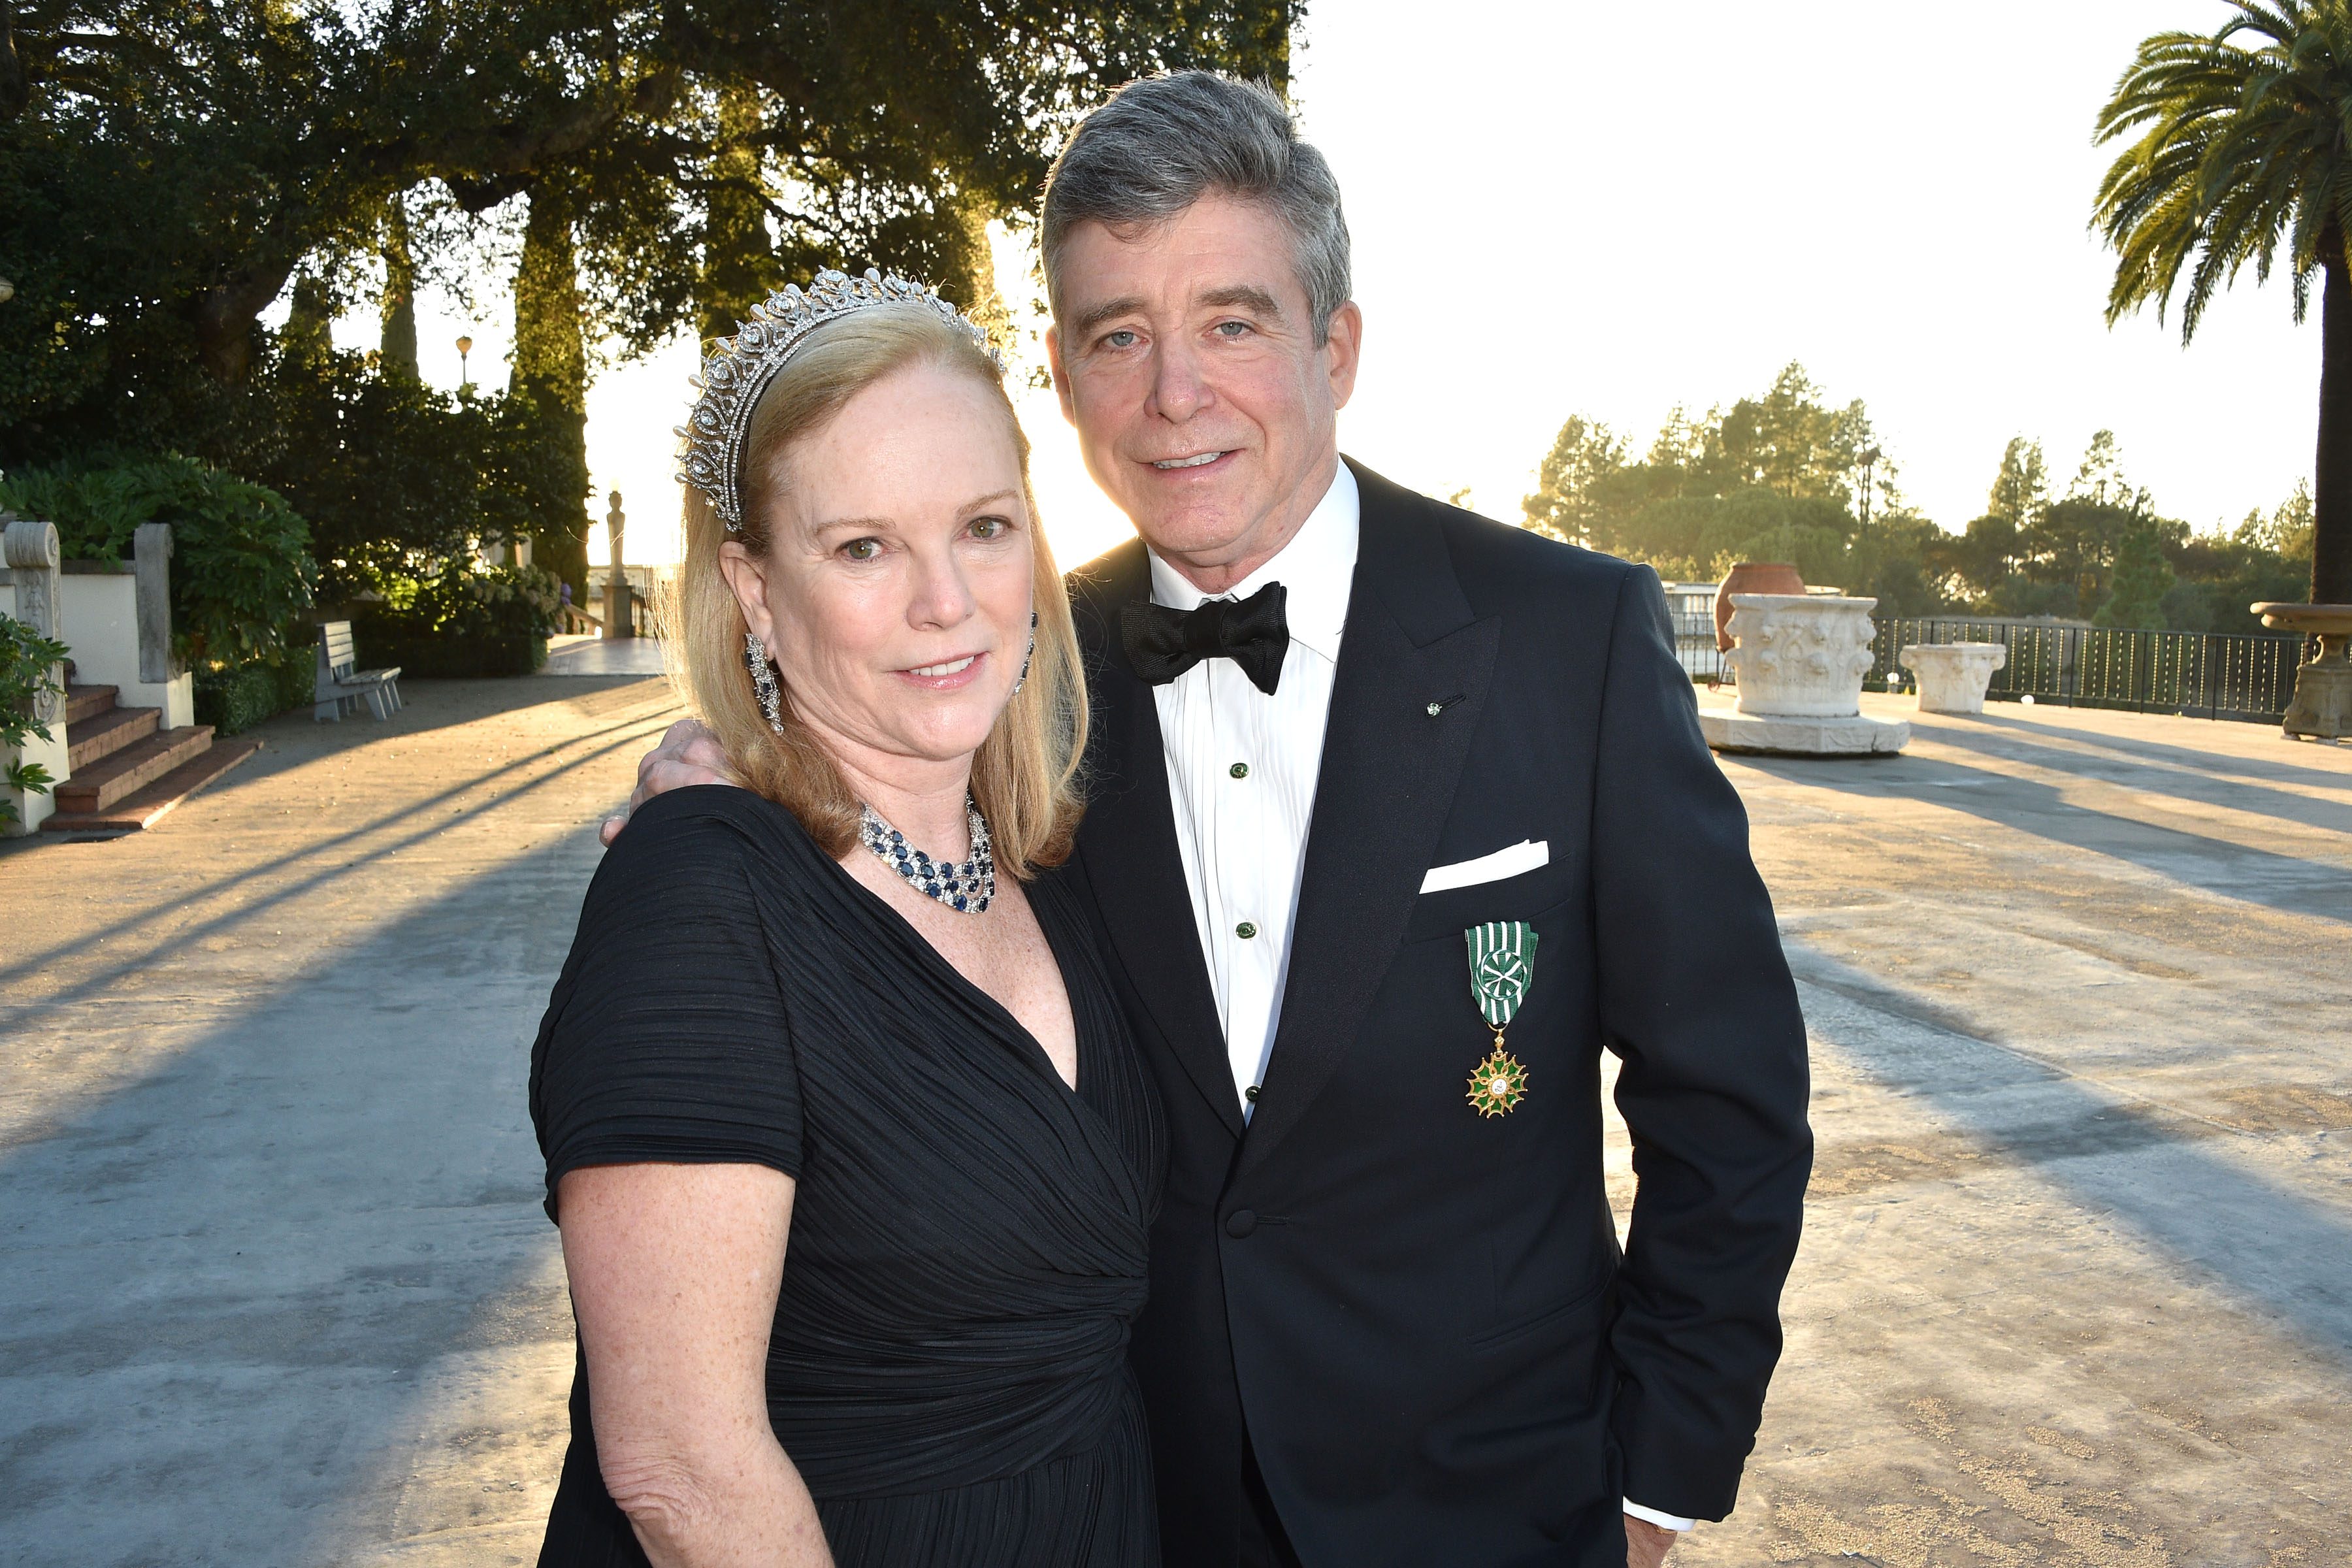 Author Jay McInerney recovering from brain surgery after ‘bloody’ incident at home — but finished a novel, smuggled champagne into ICU